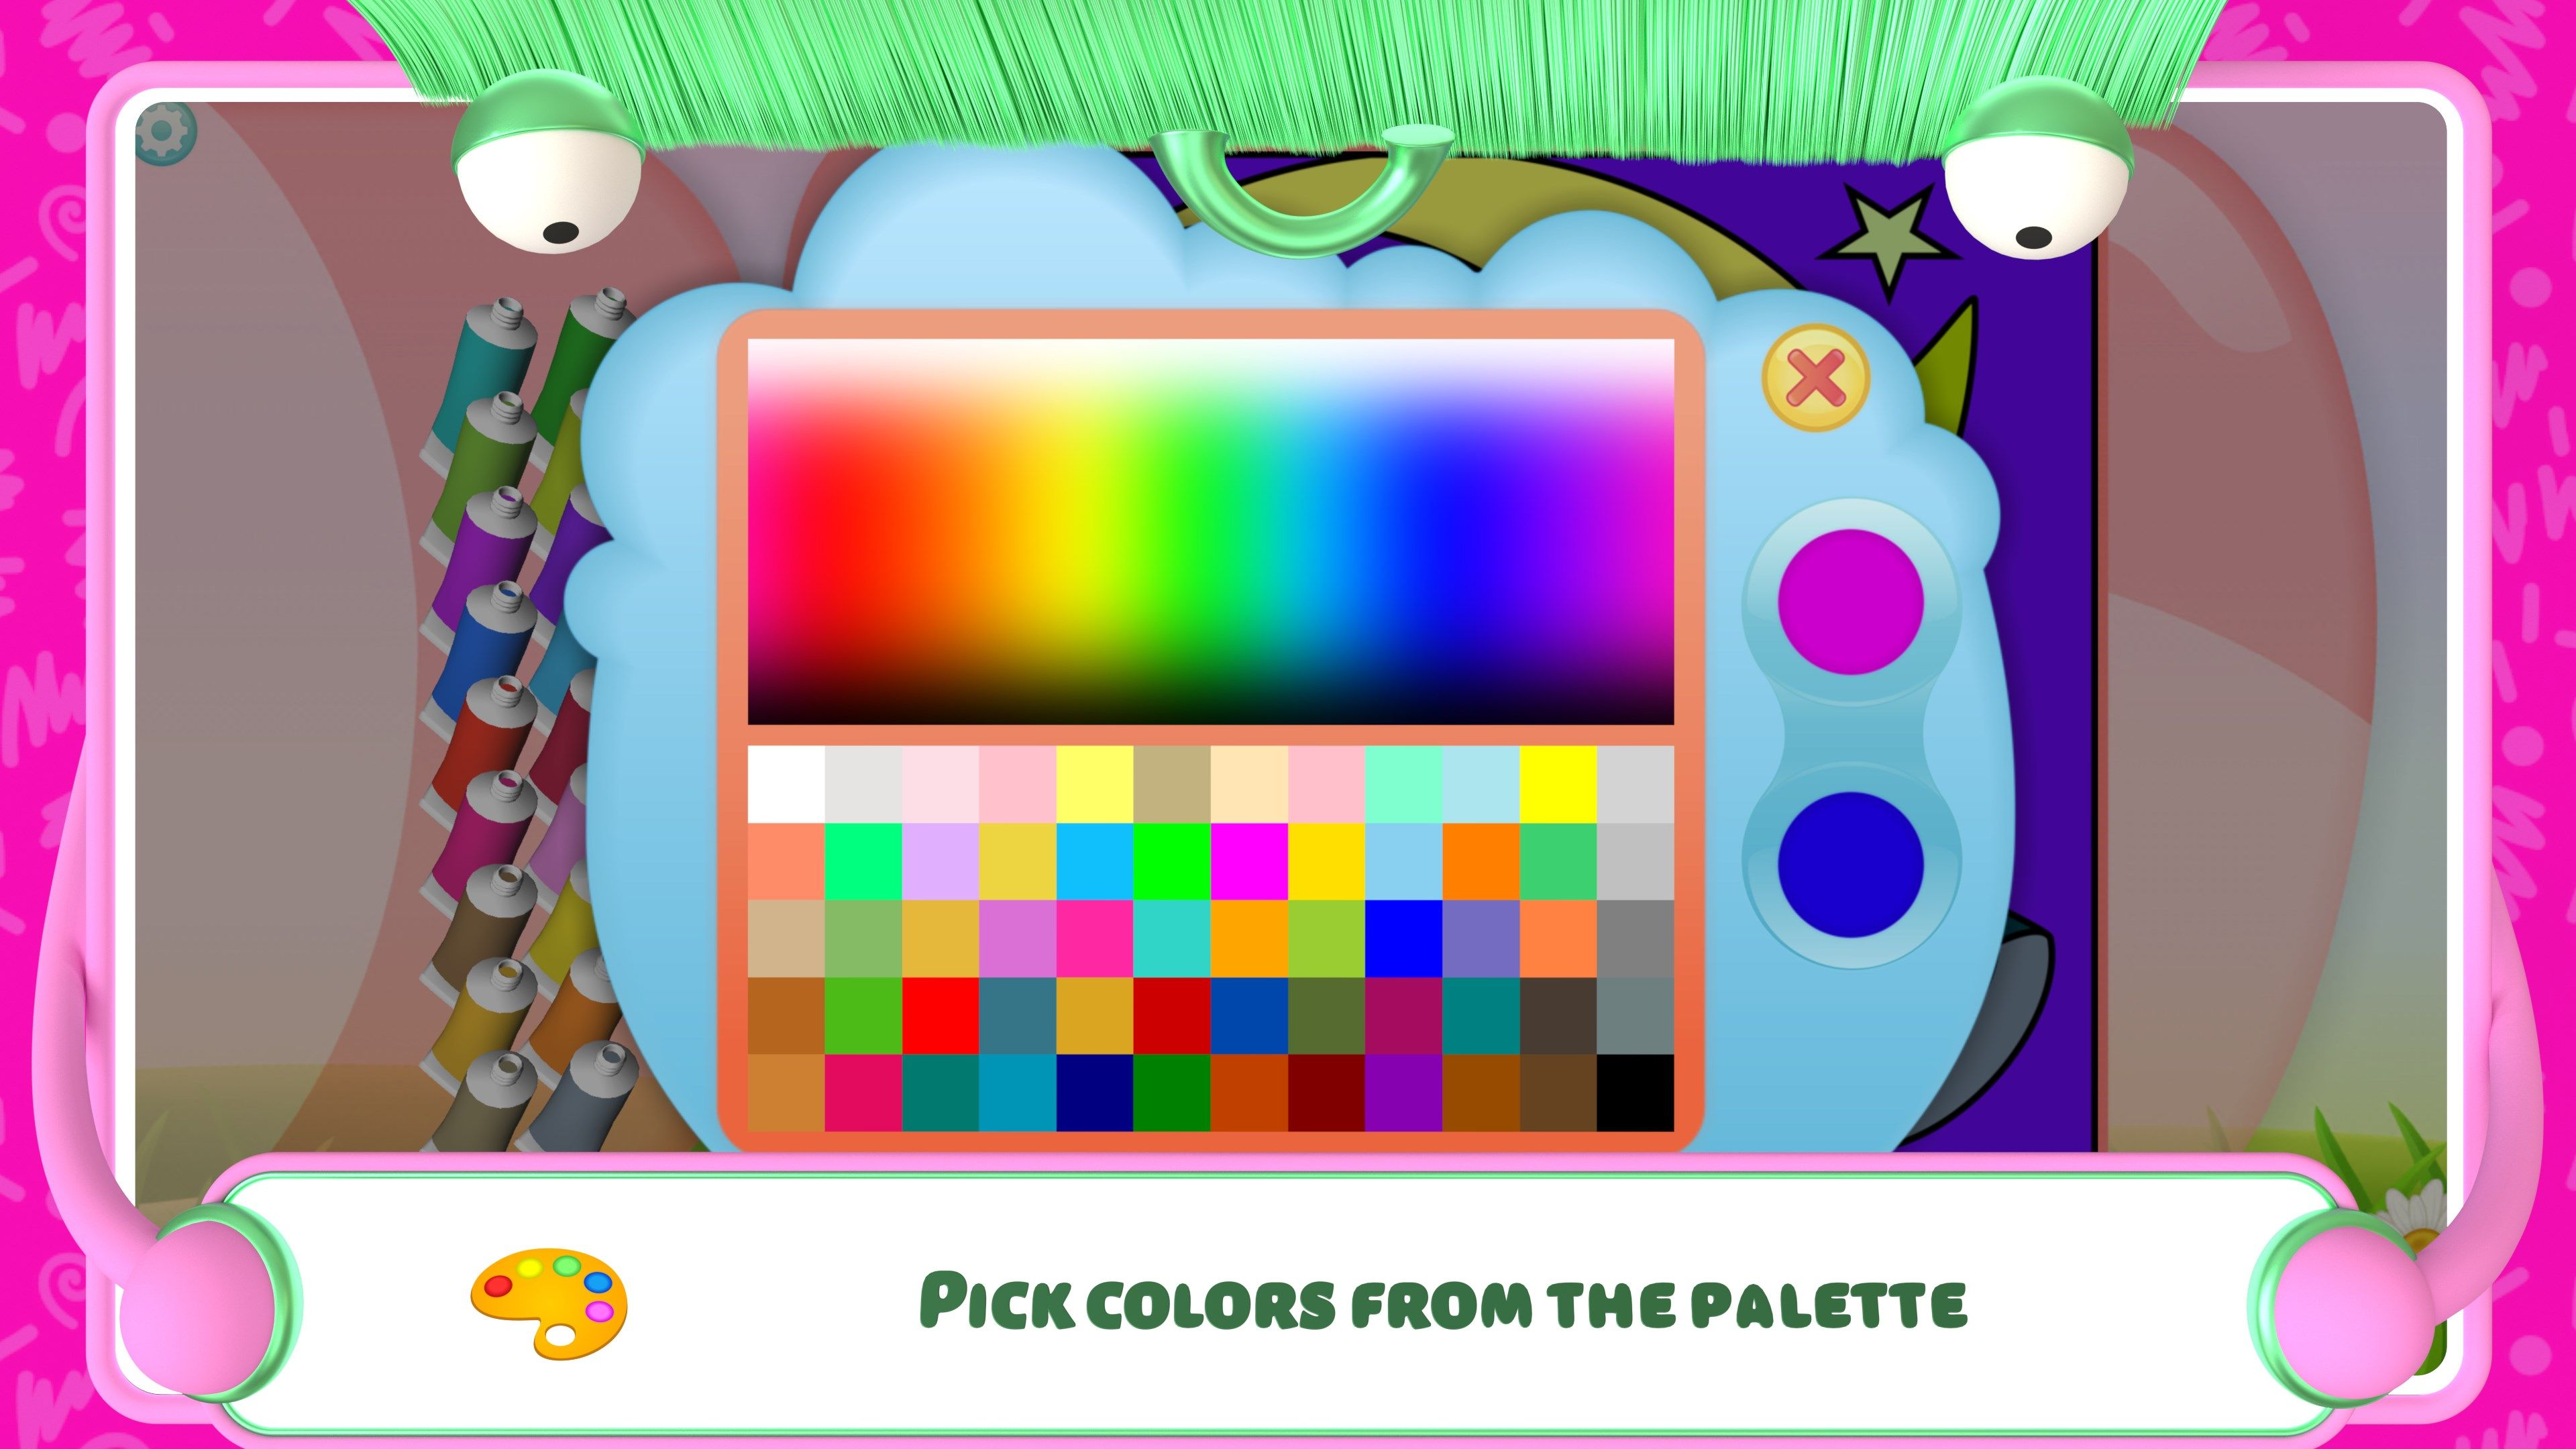 Pick colors from the palette